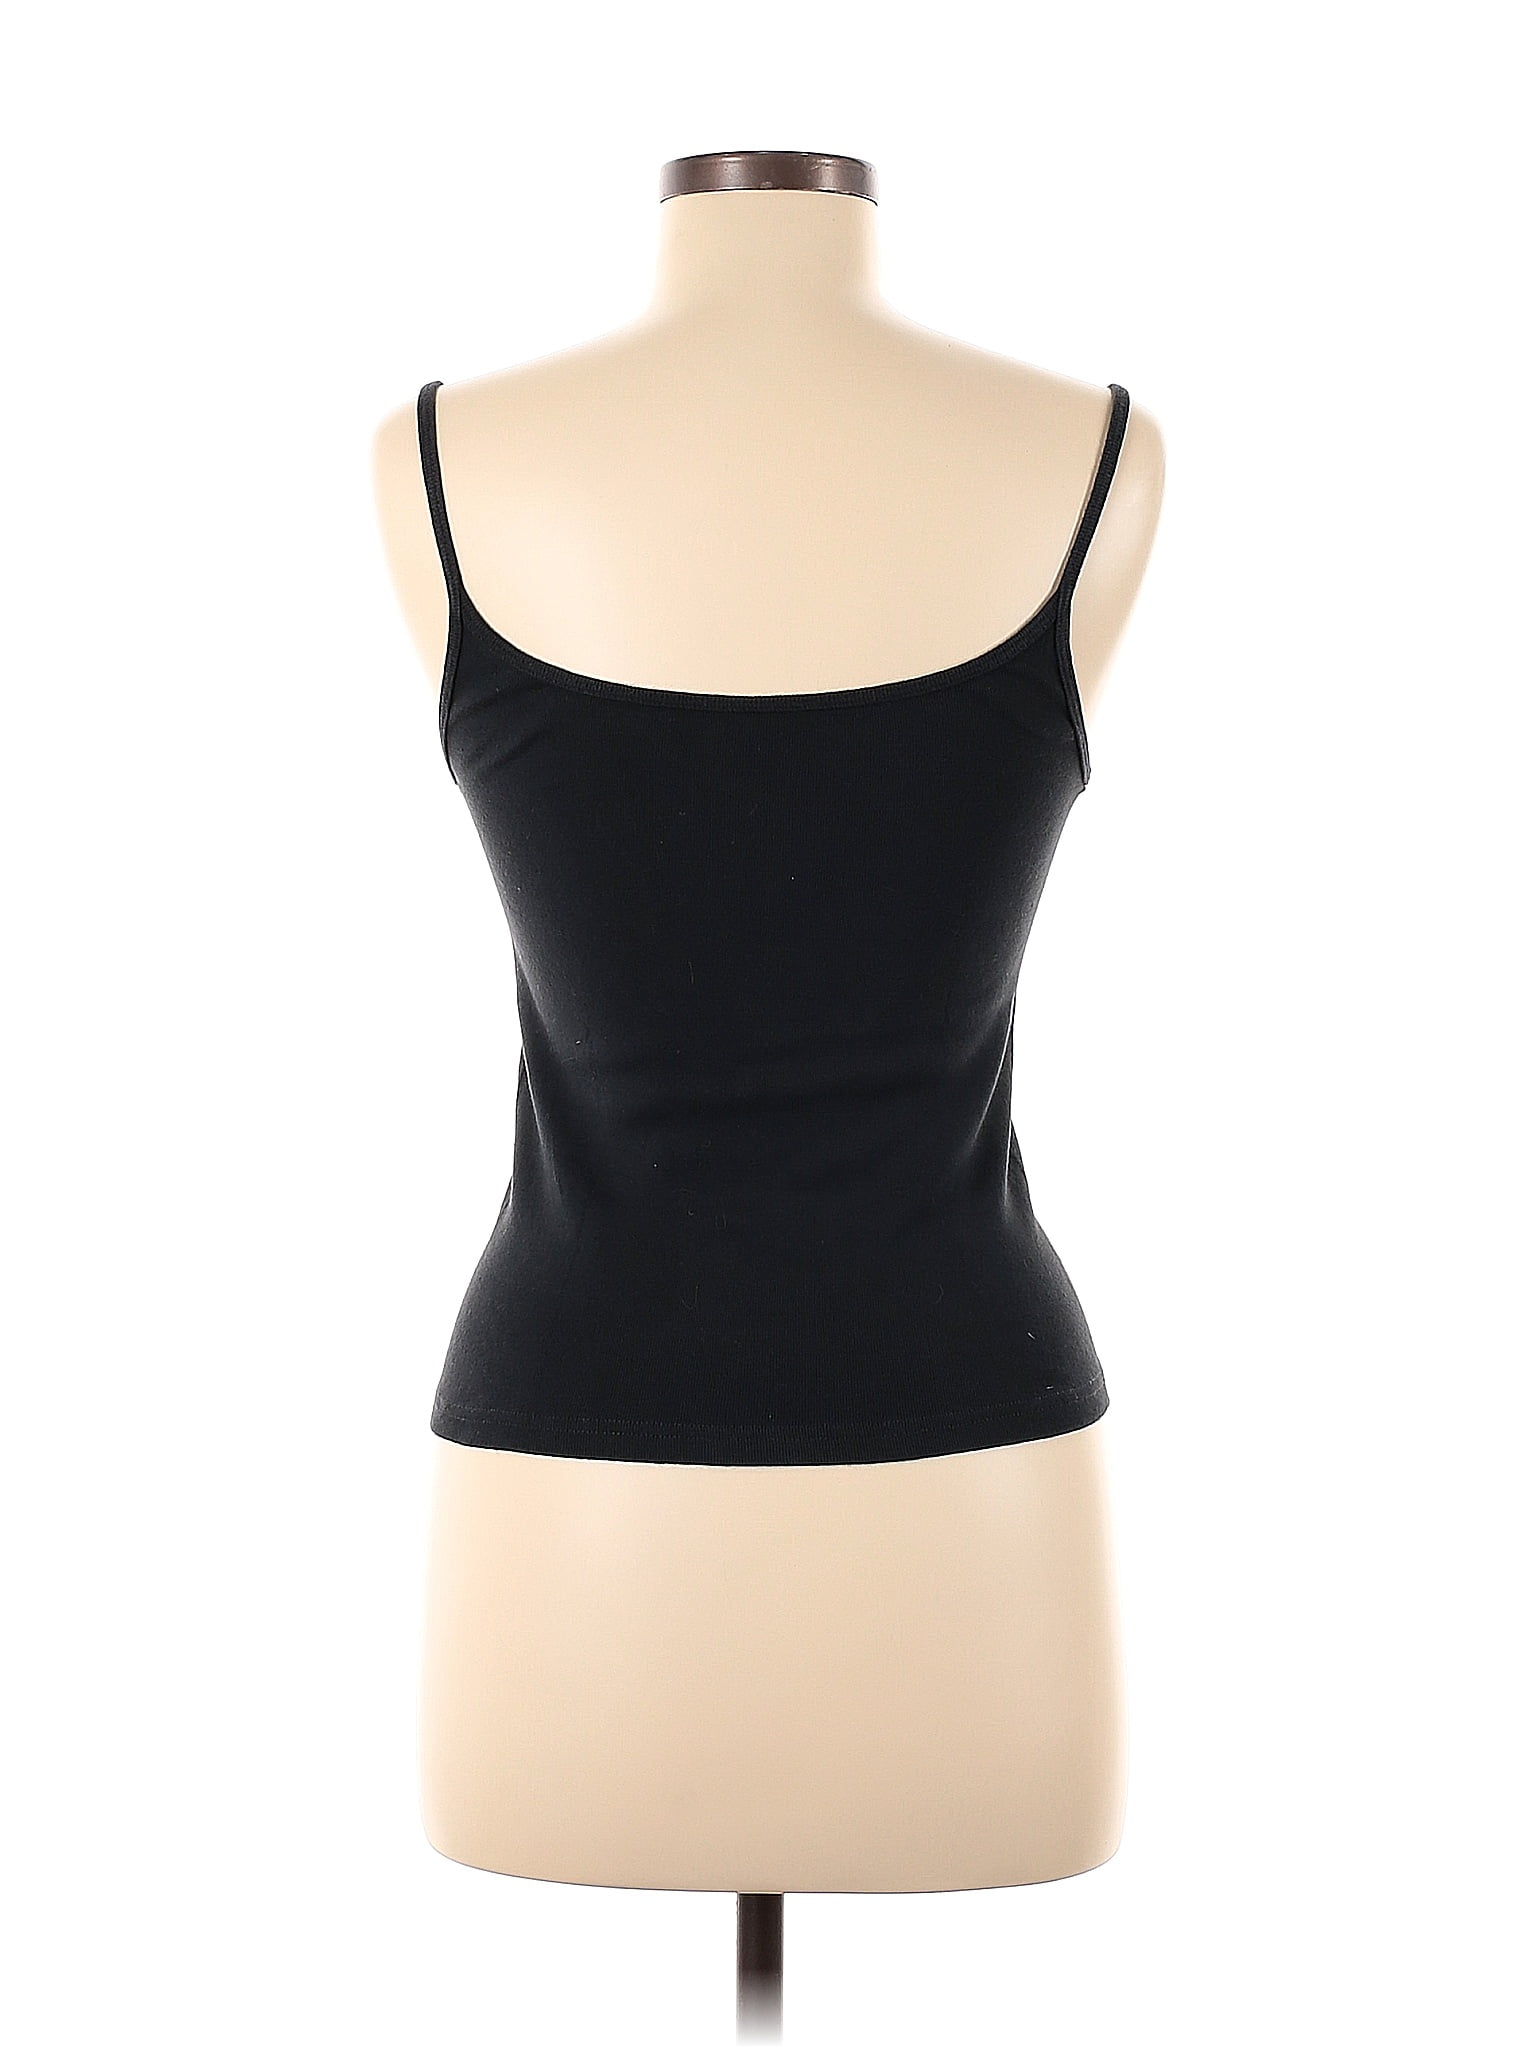 Brandy Melville 100% Cotton Solid Black Tank Top One Size - 42% off